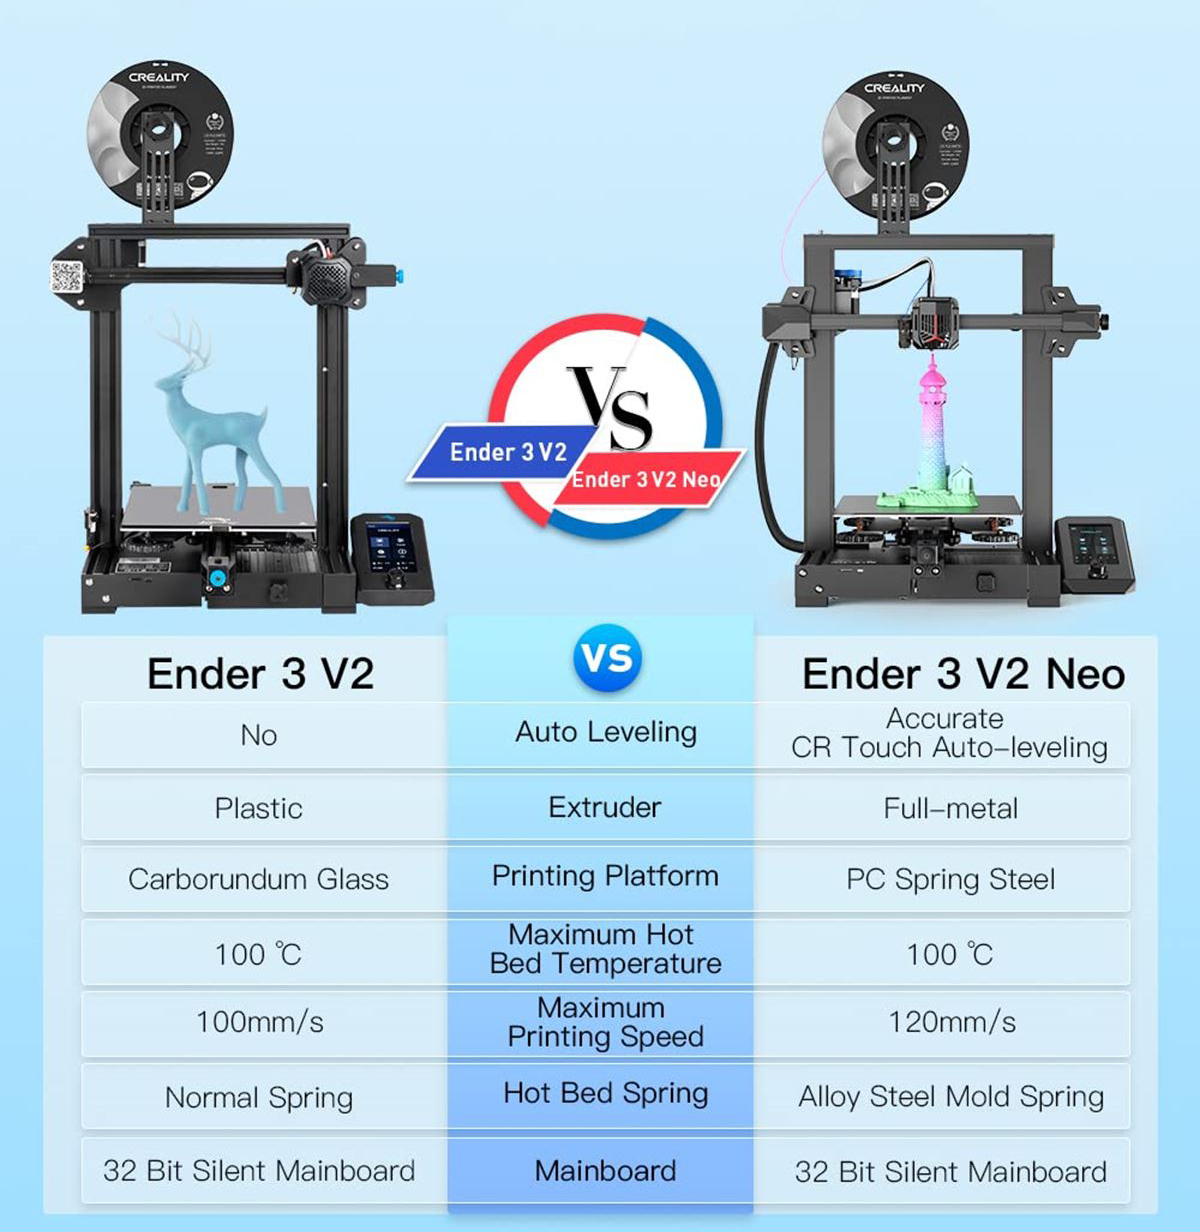 Ender 3 V2 - All You Need to Know